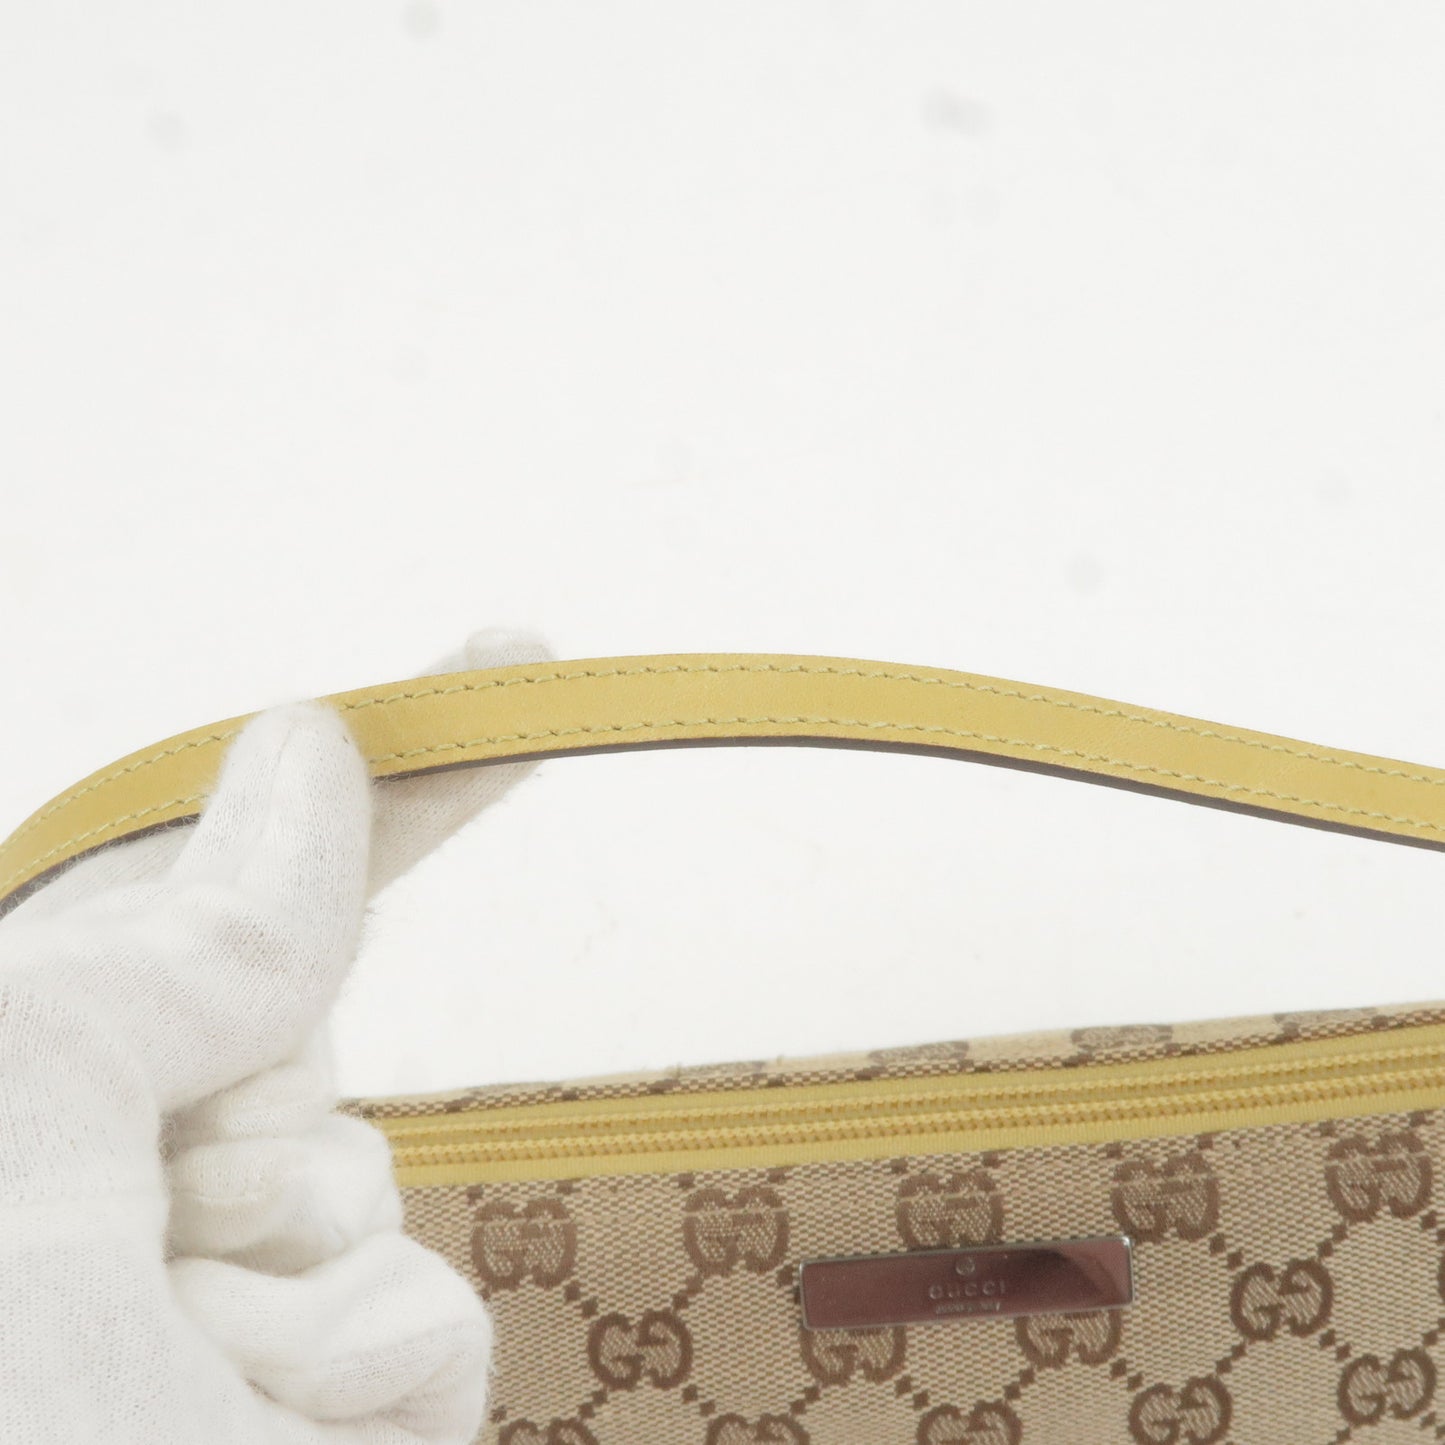 GUCCI GG Canvas Leather Boat Bag Hand Bag Beige Yellow 07198